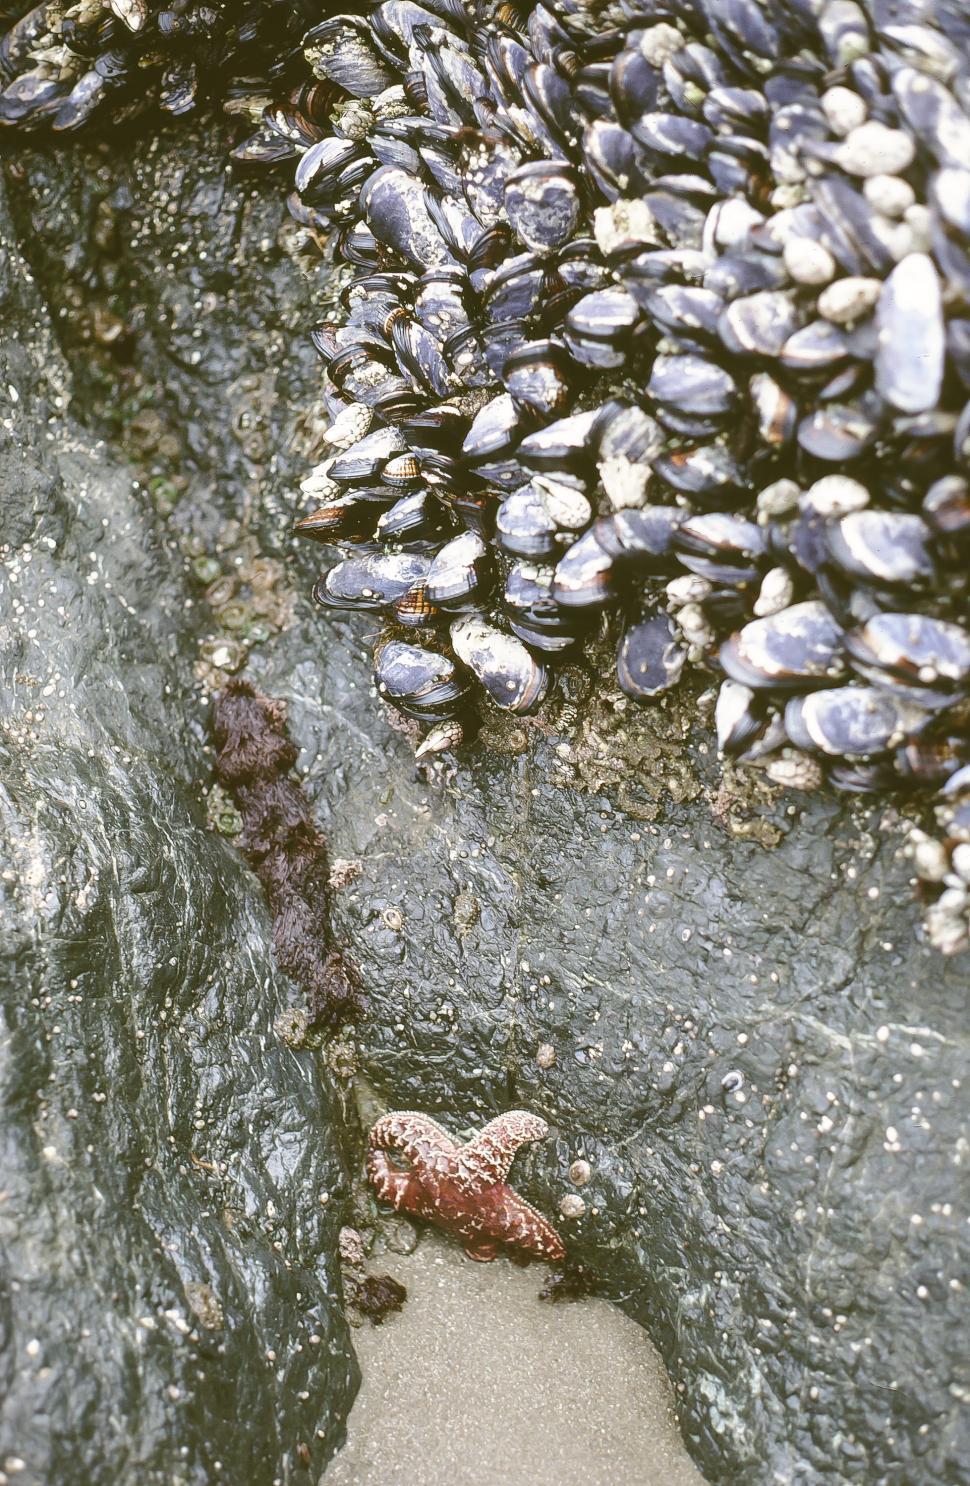 Free Image of Clams clustered on beach 